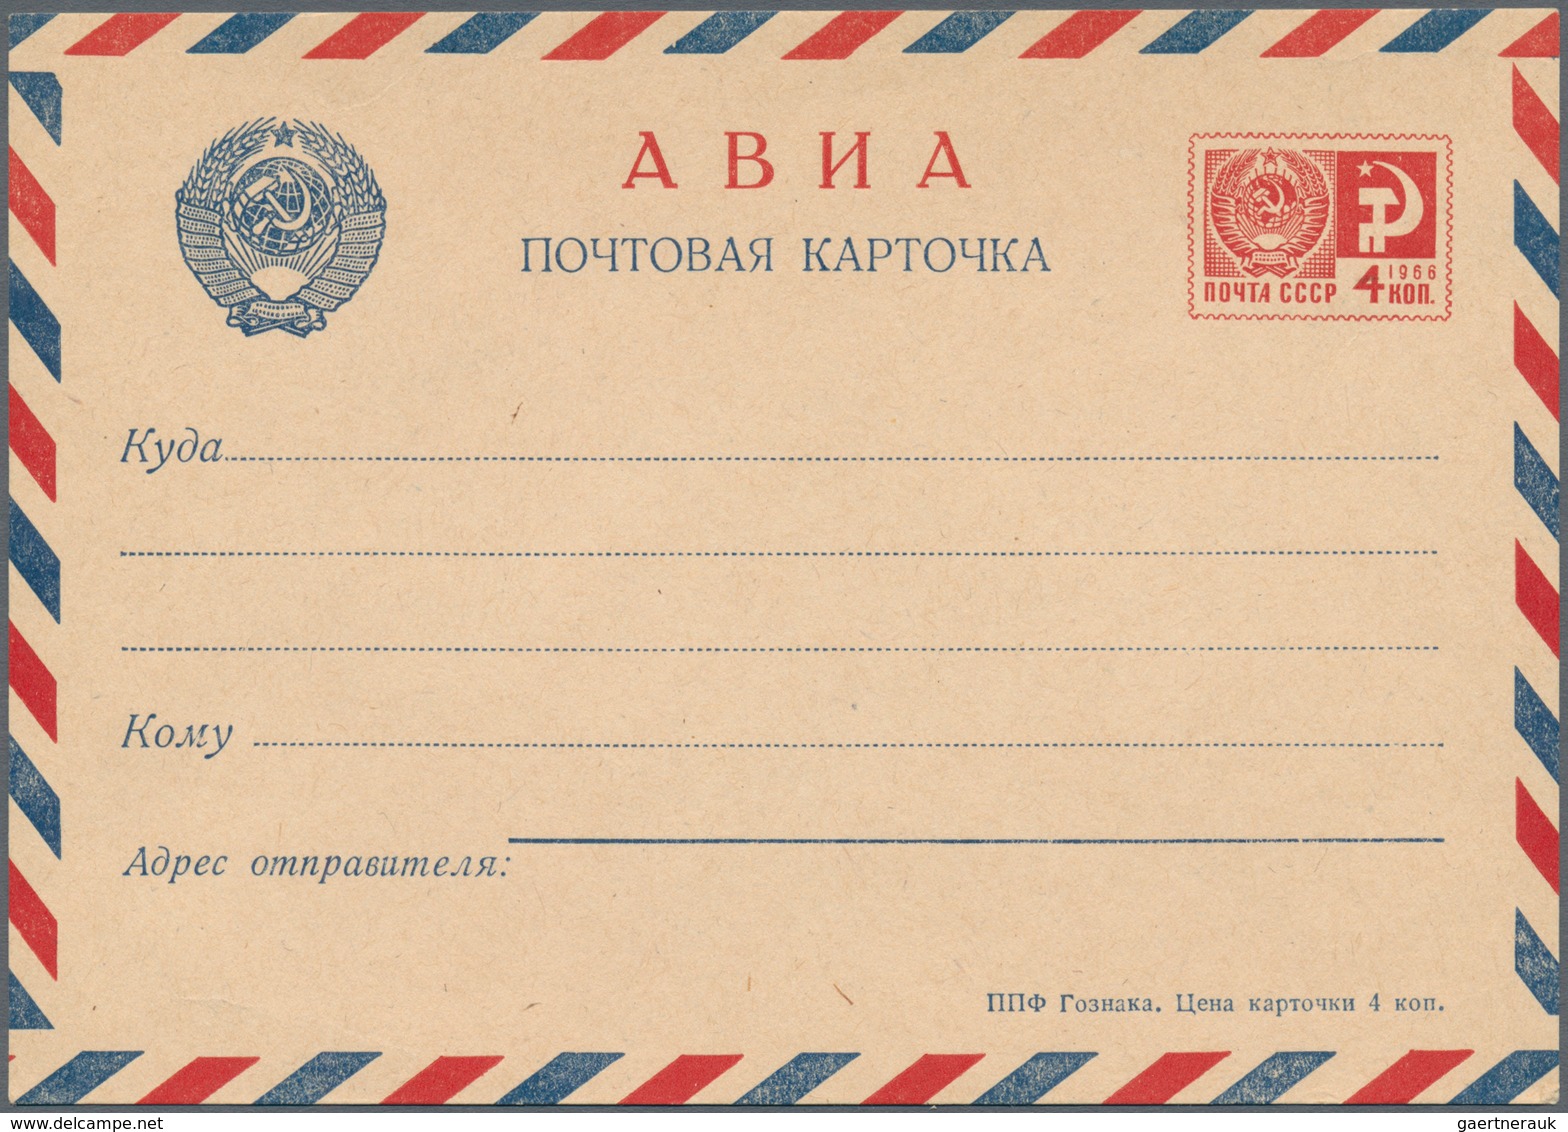 Europa: More than 2000 postal stationery cards and aerograms - a pleasure for the thematics collecto